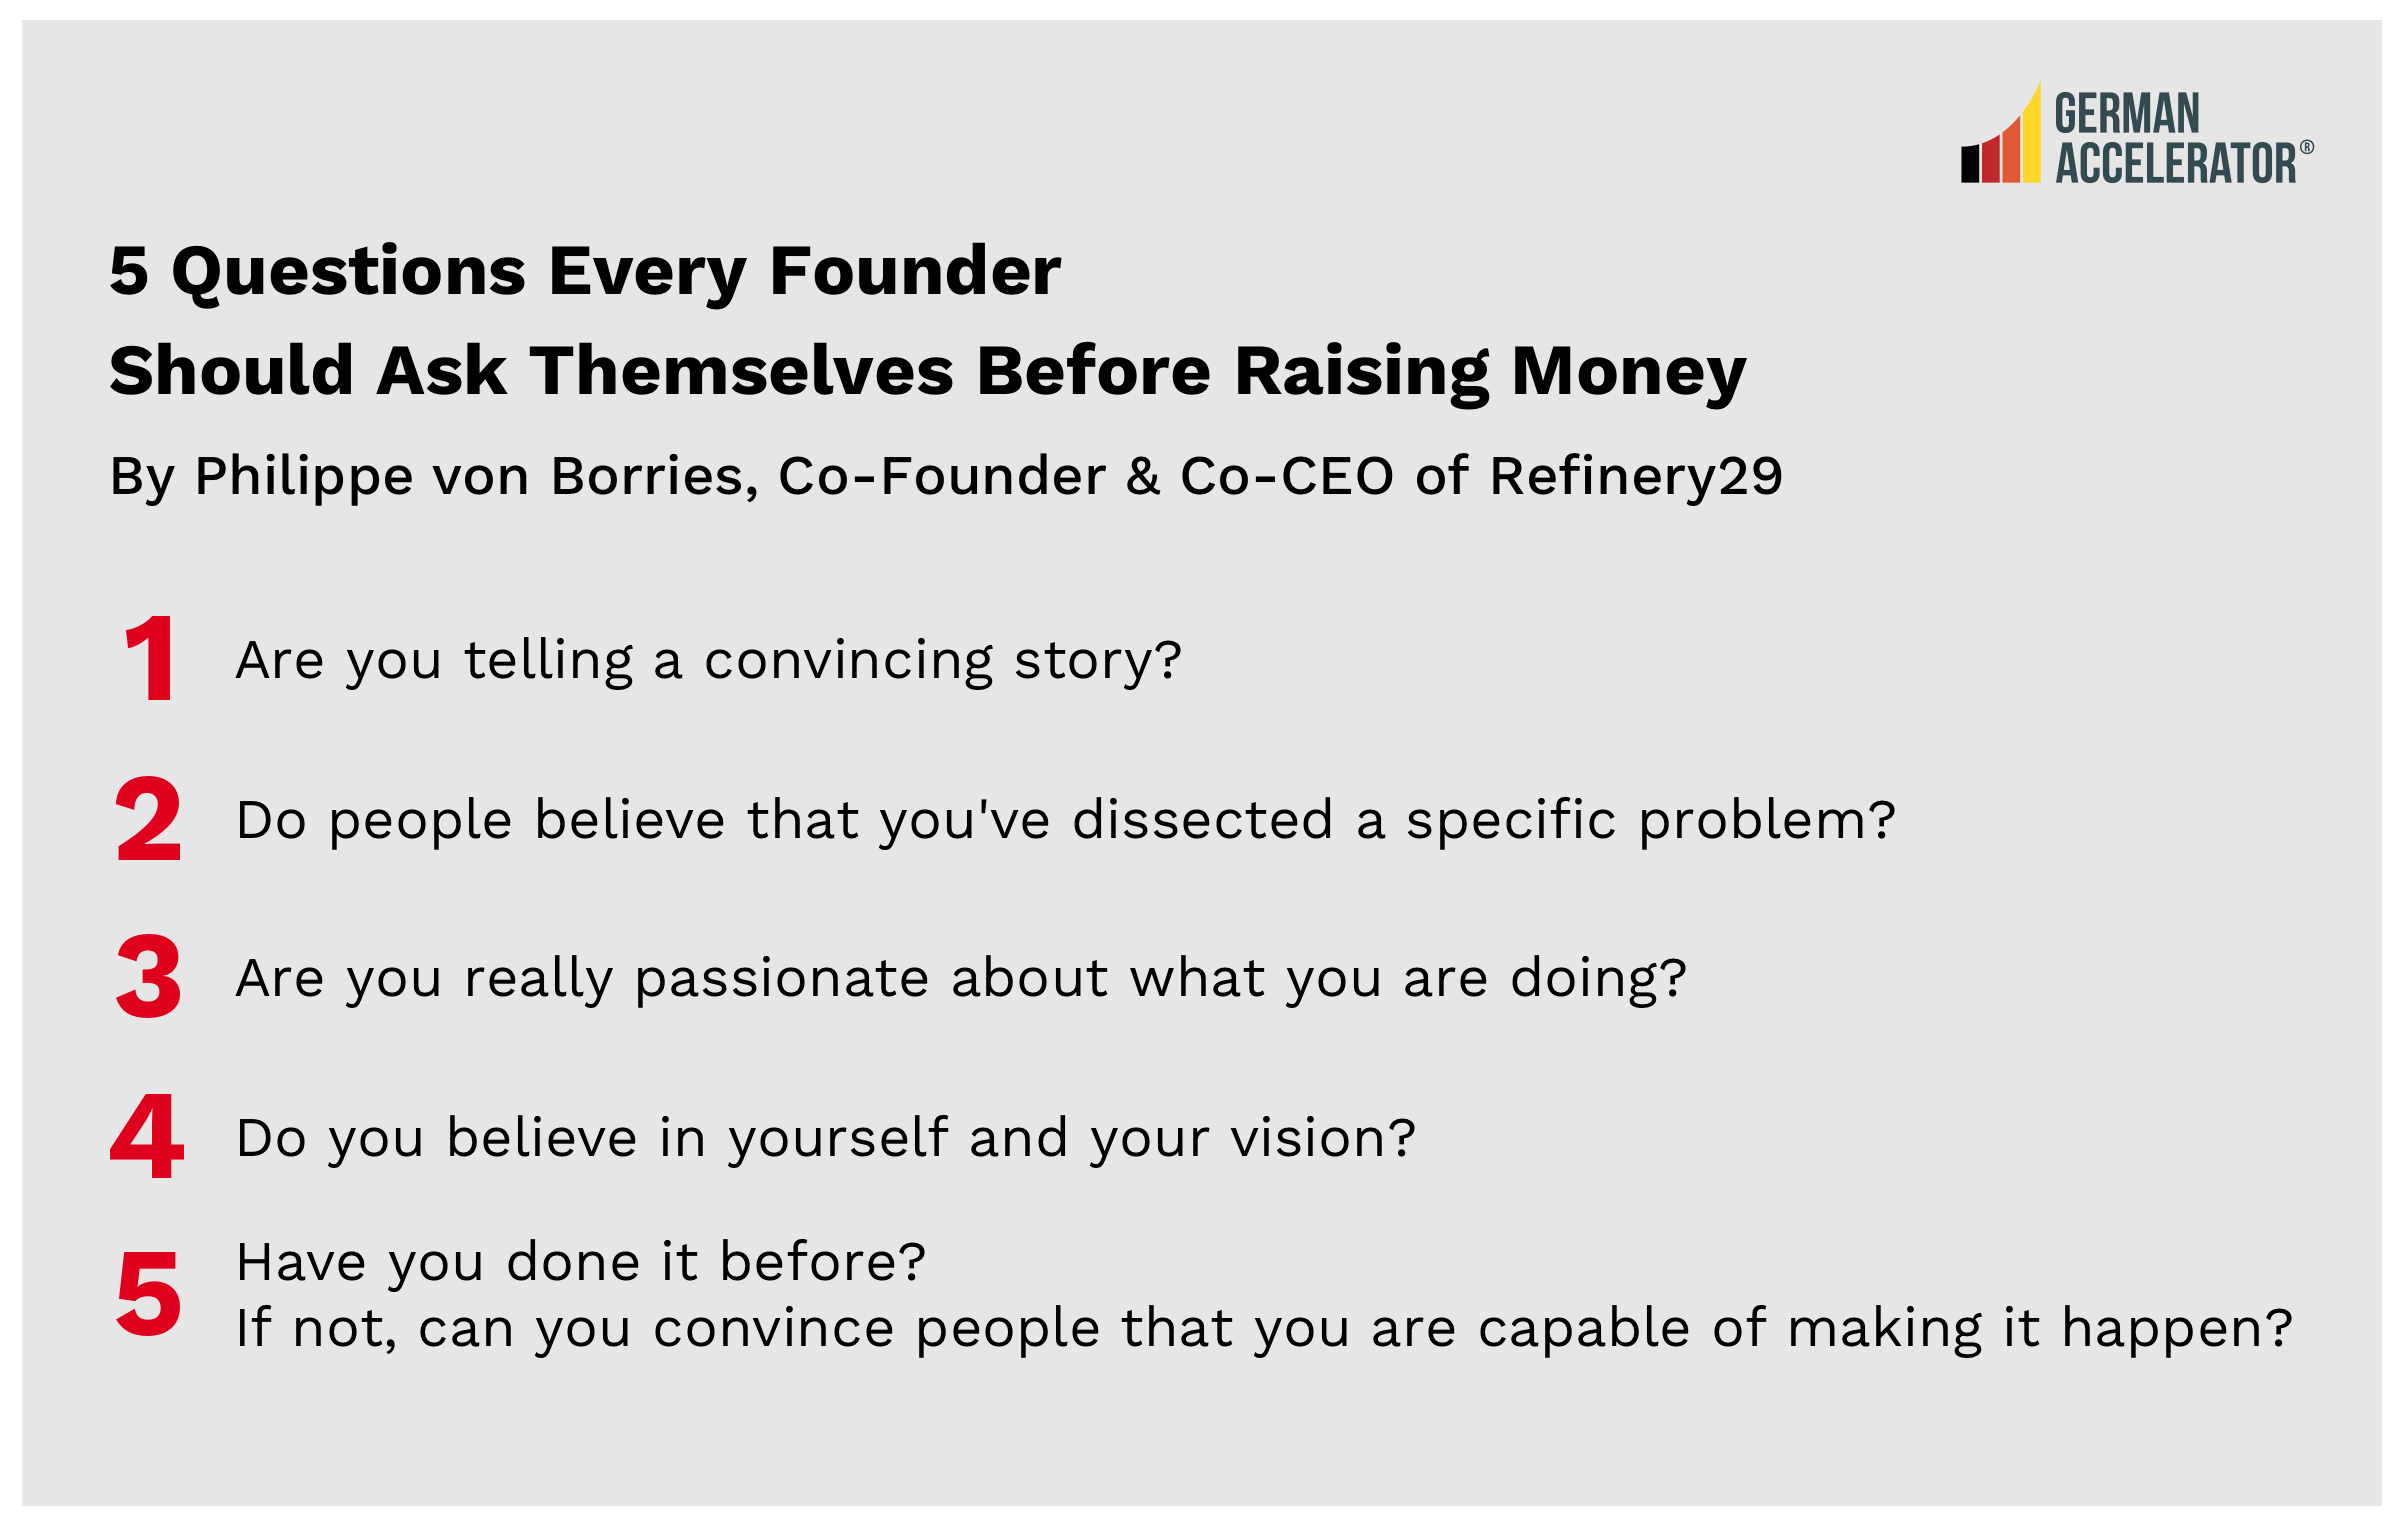 Visual Outlining "5 Questions Every Founder Should Ask Themselves Before Raising Money"